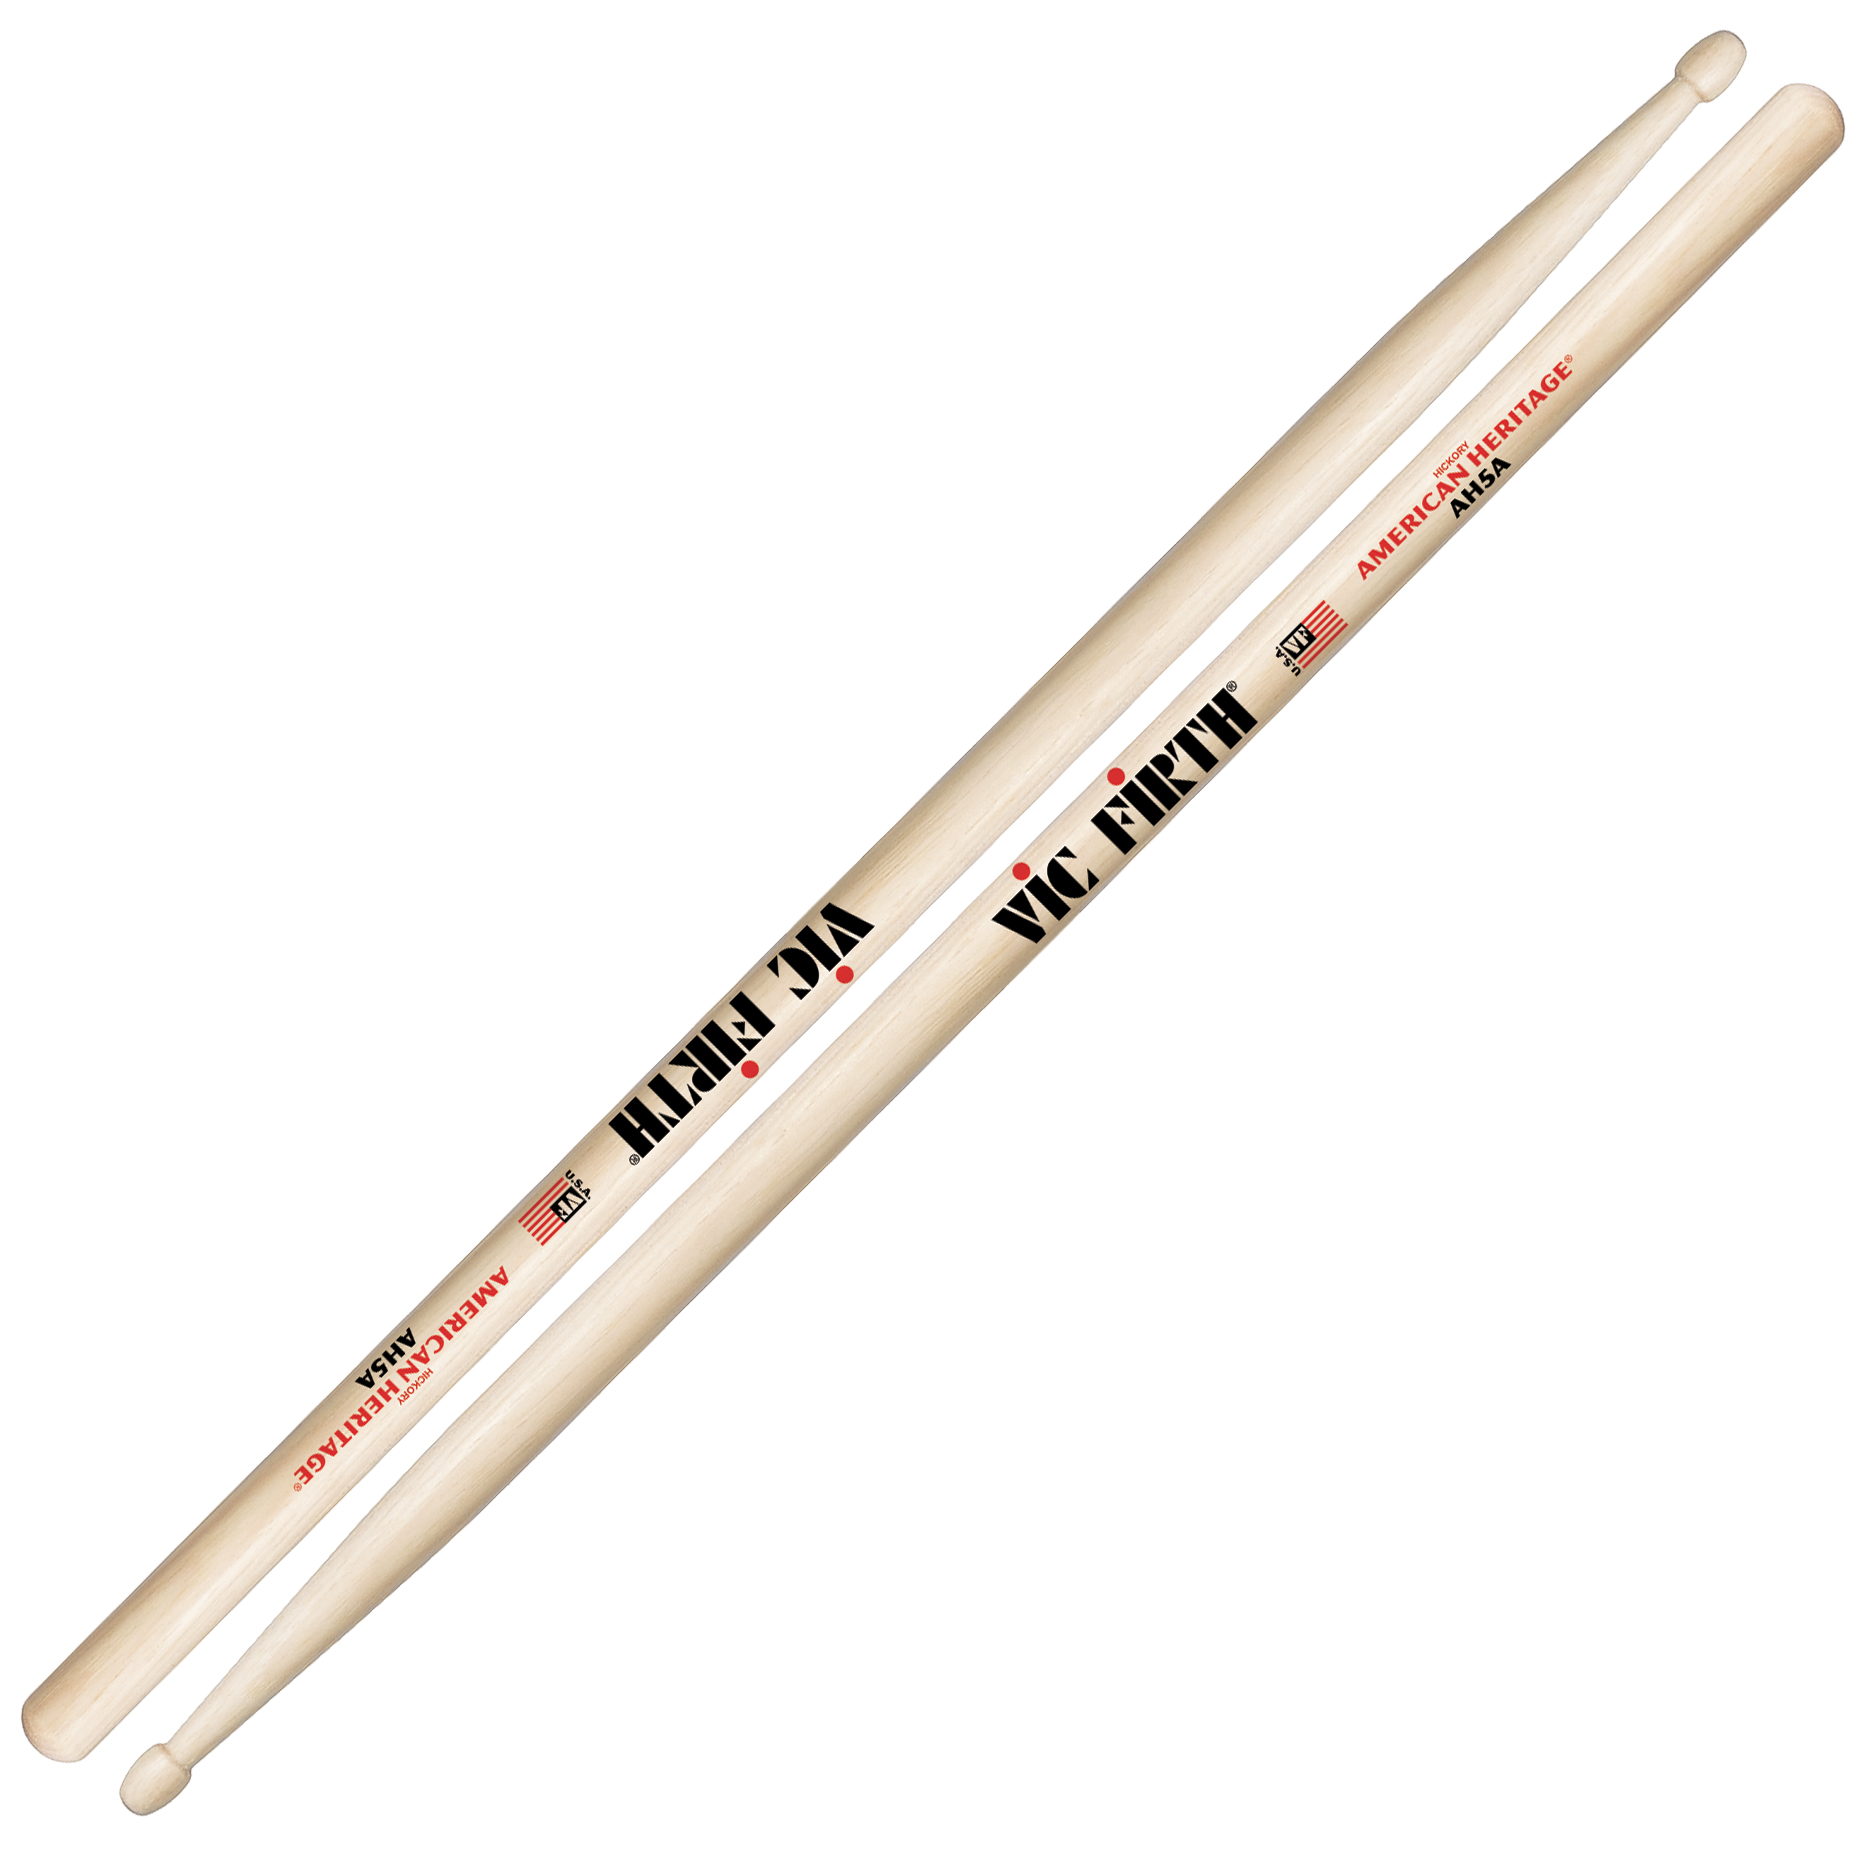 Vic Firth American Heritage 5a Maple Ah5a - Drum stick - Variation 2